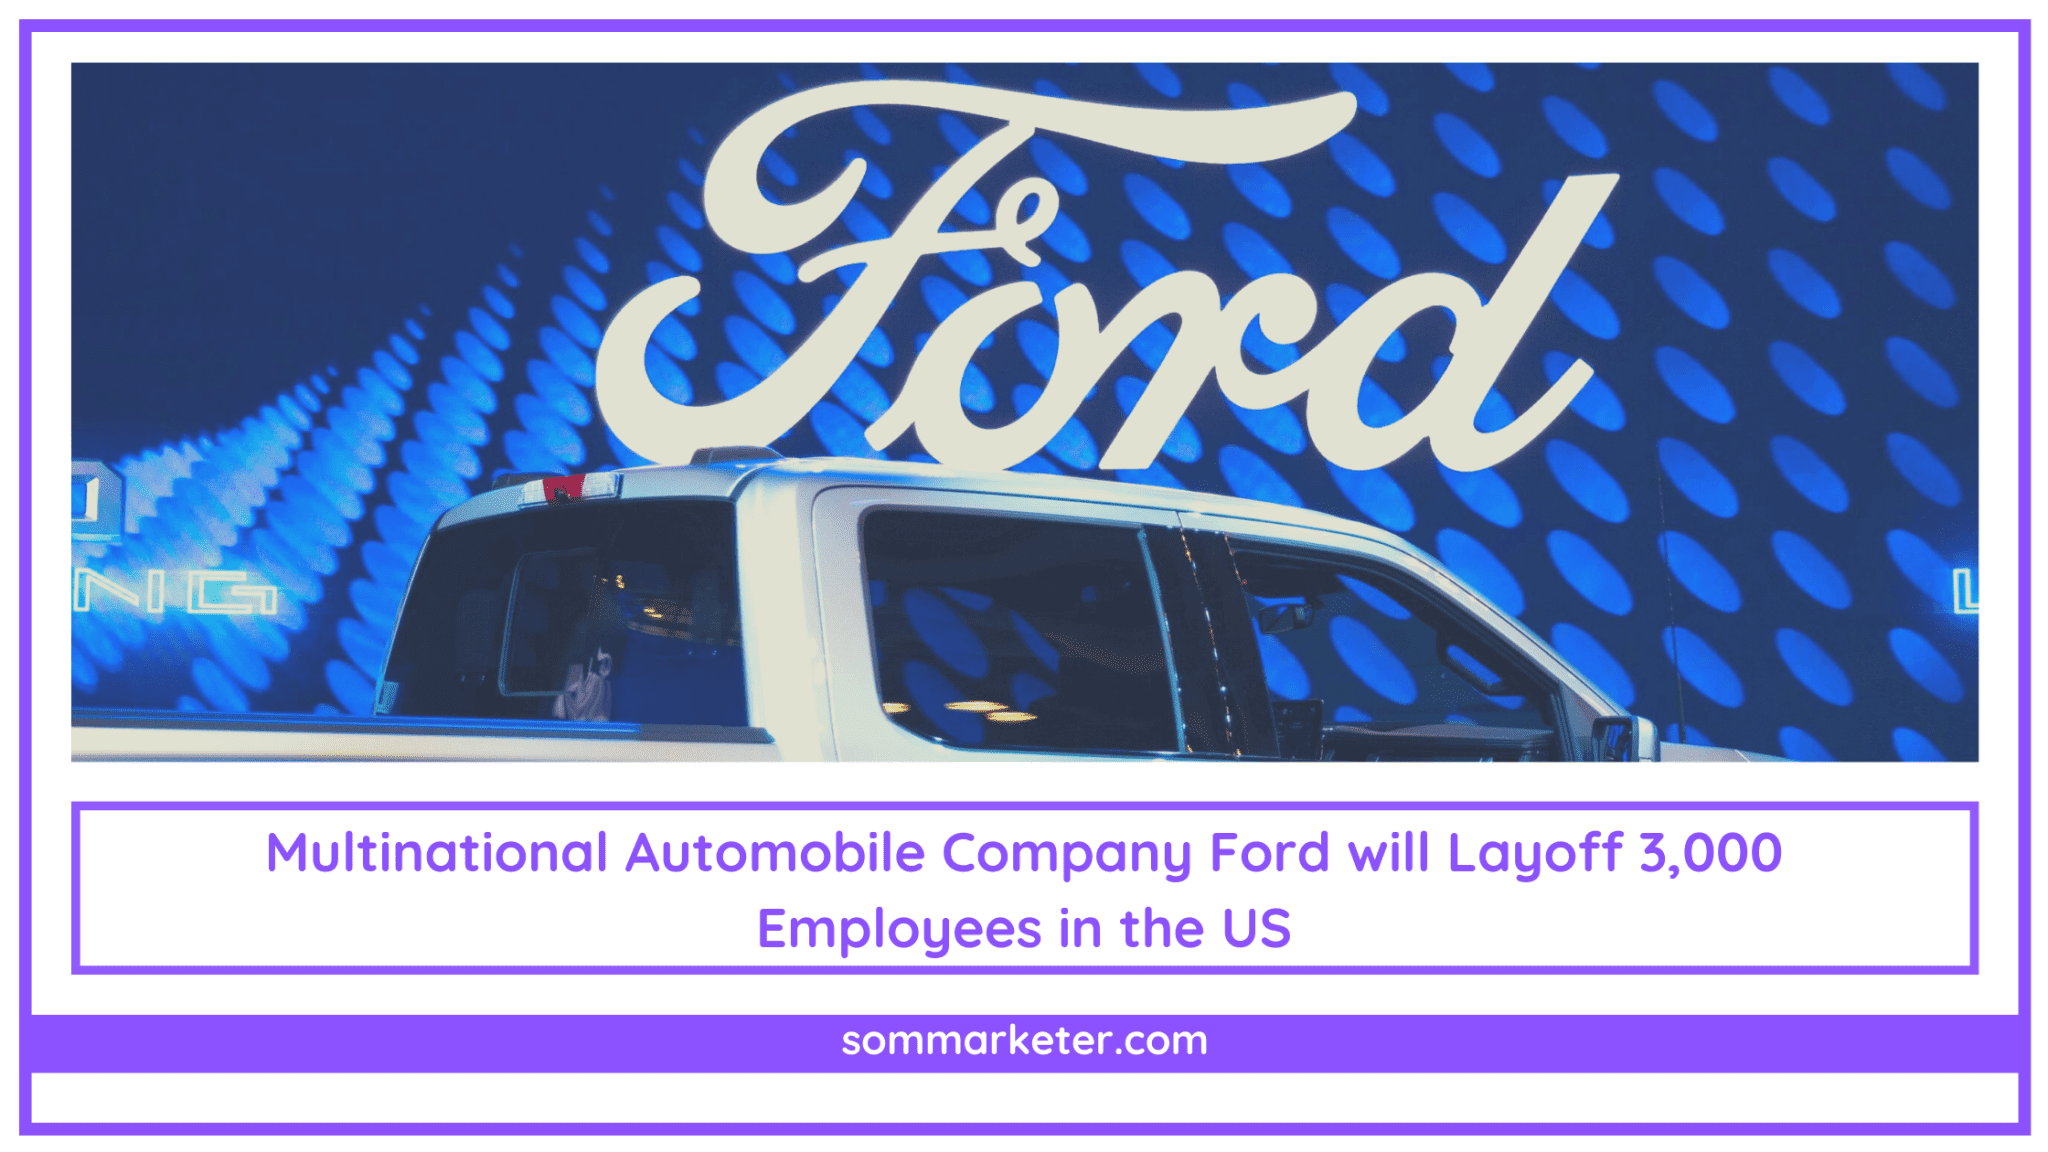 Multinational Automobile Company Ford will Layoff 3,000 Employees in